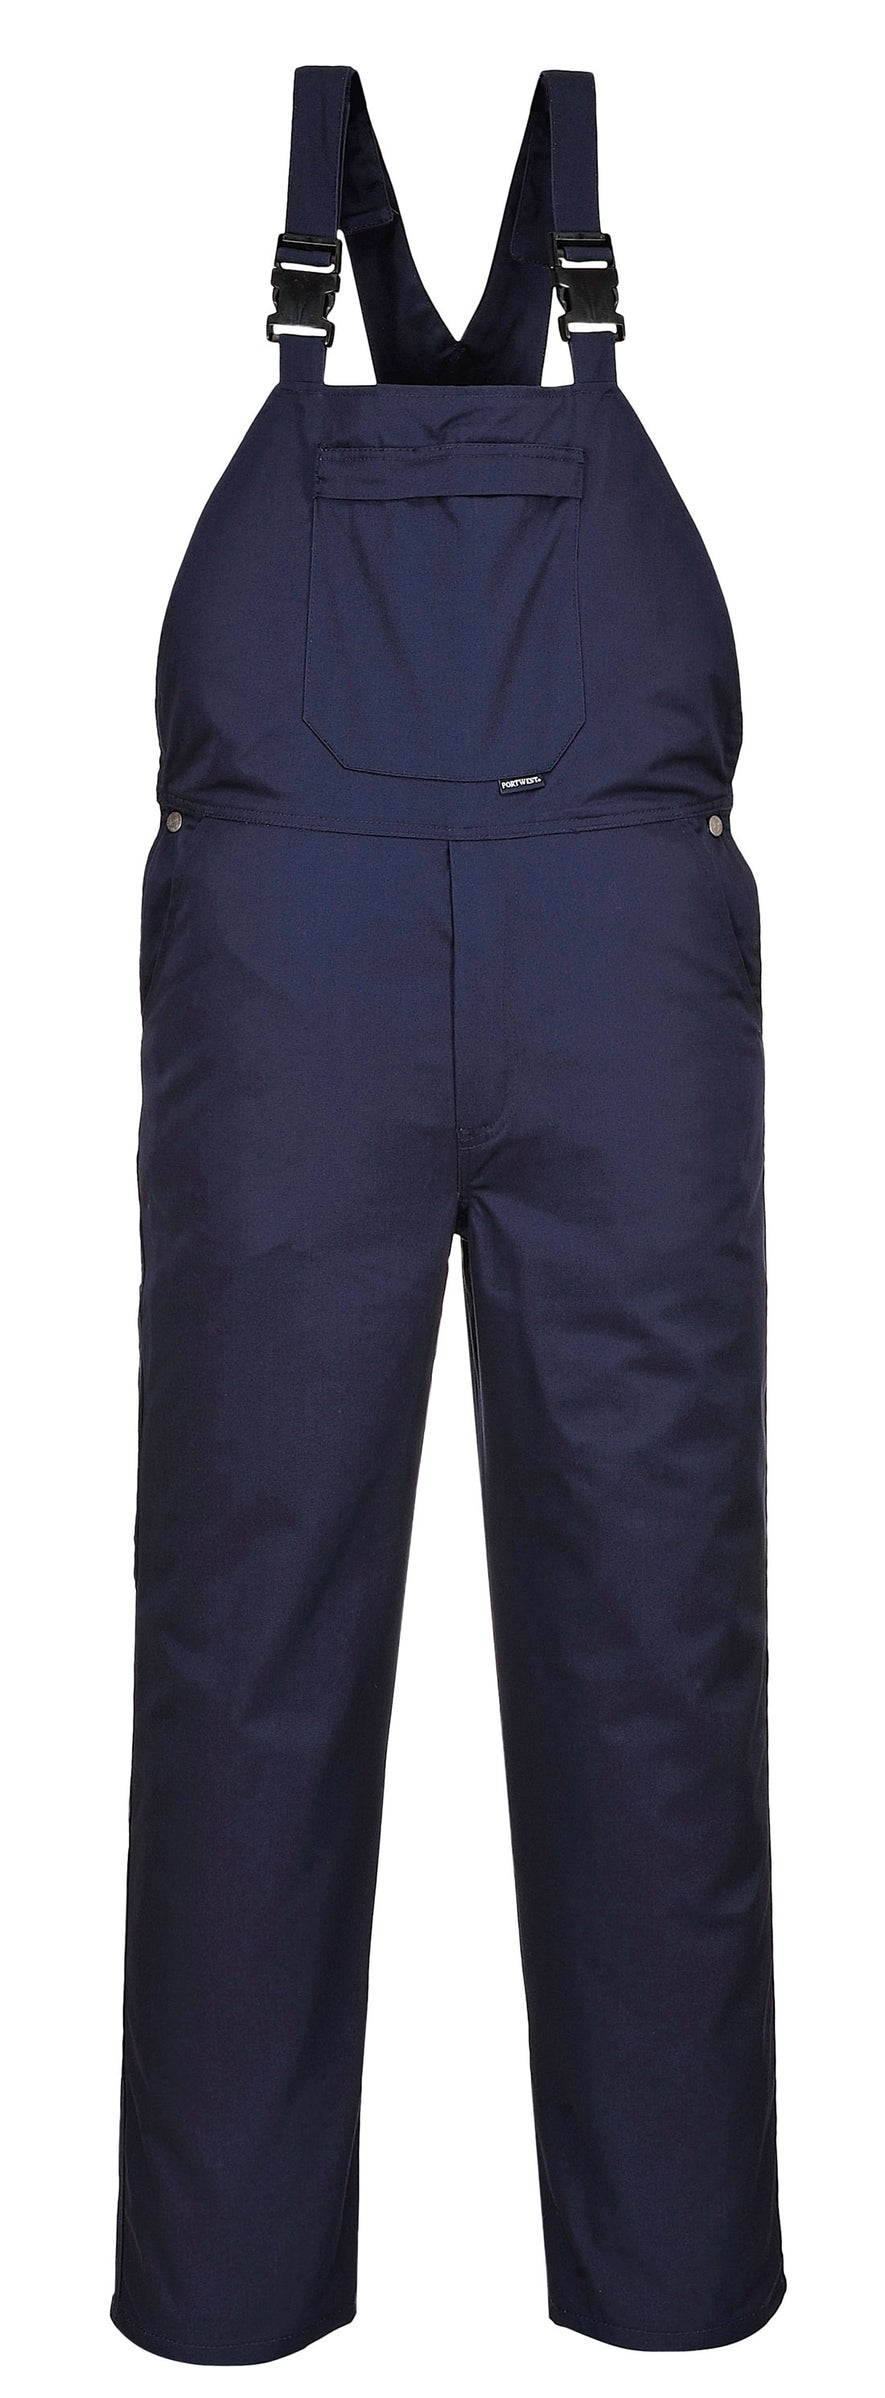 Portwest Burnley Bib and Brace in navy with straps over shoulders with plastic buckles, pocket on chest and full length trousers.